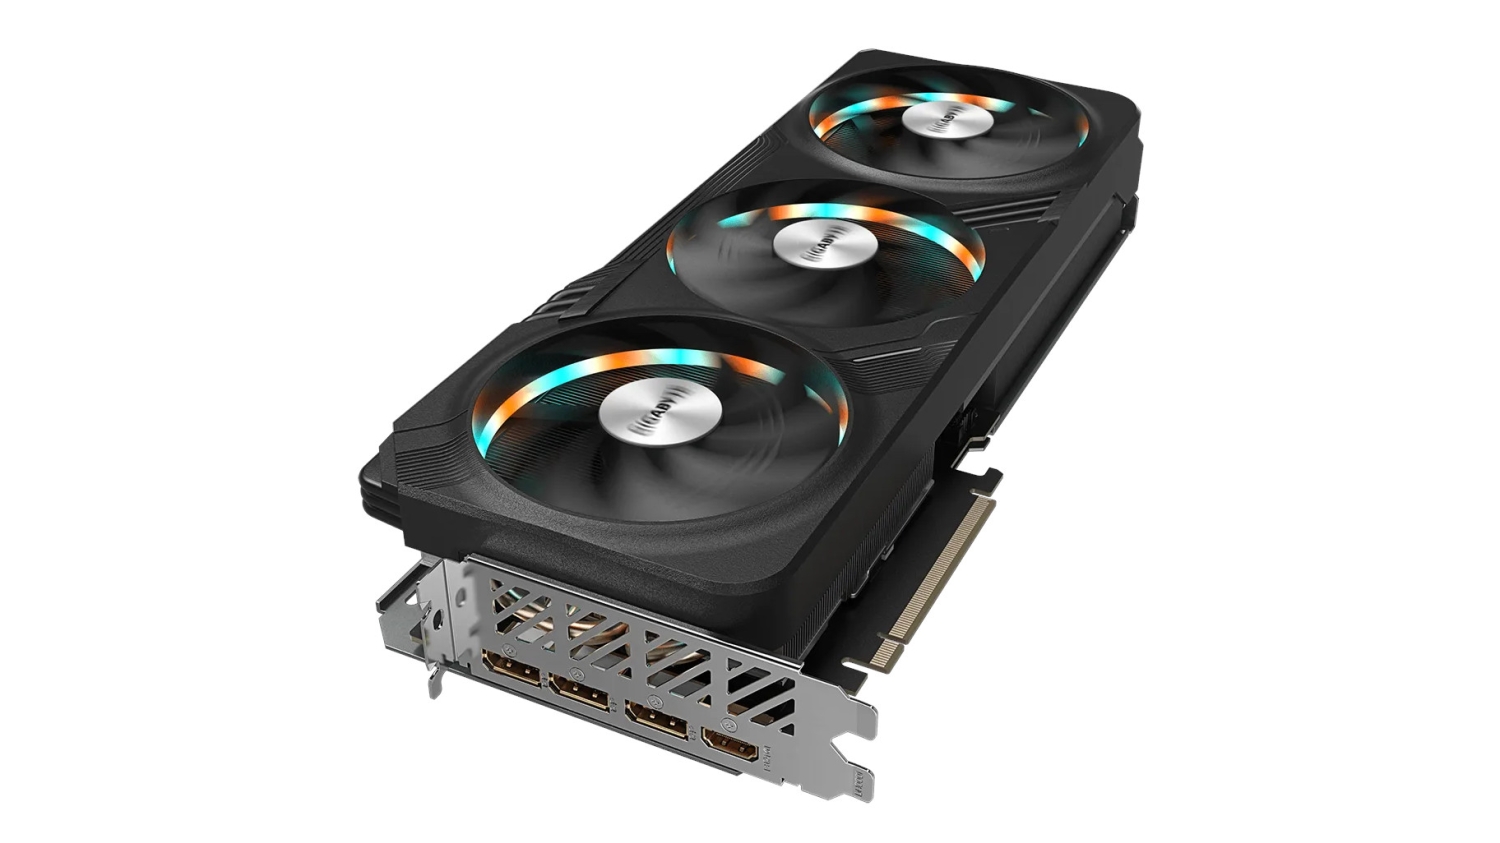 TweakTown Enlarged Image - The RTX 4070 Ti is $200 more than the vanilla 4070, if this speculation turns out to be correct (Image Credit: NVIDIA)